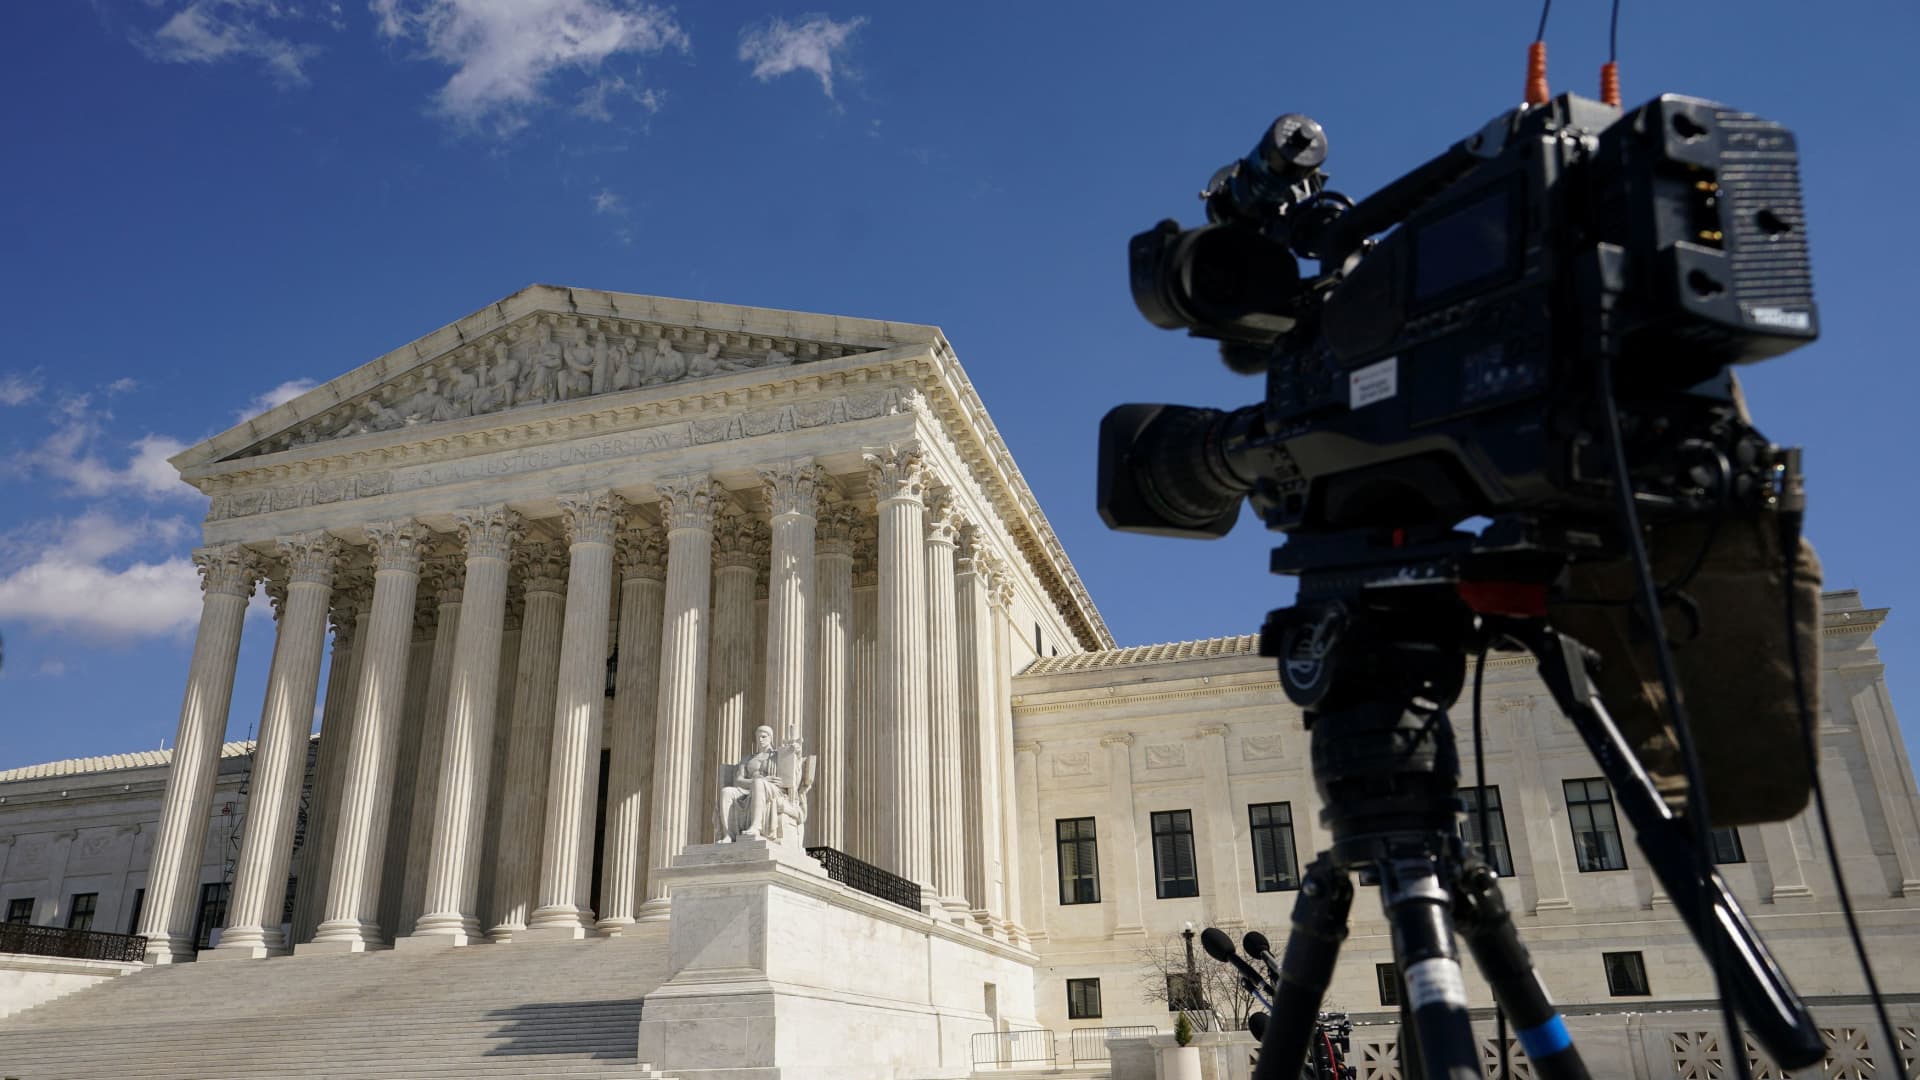 Supreme Court rules 9-0 that bankruptcy filers can't avoid debt incurred by another's fraud